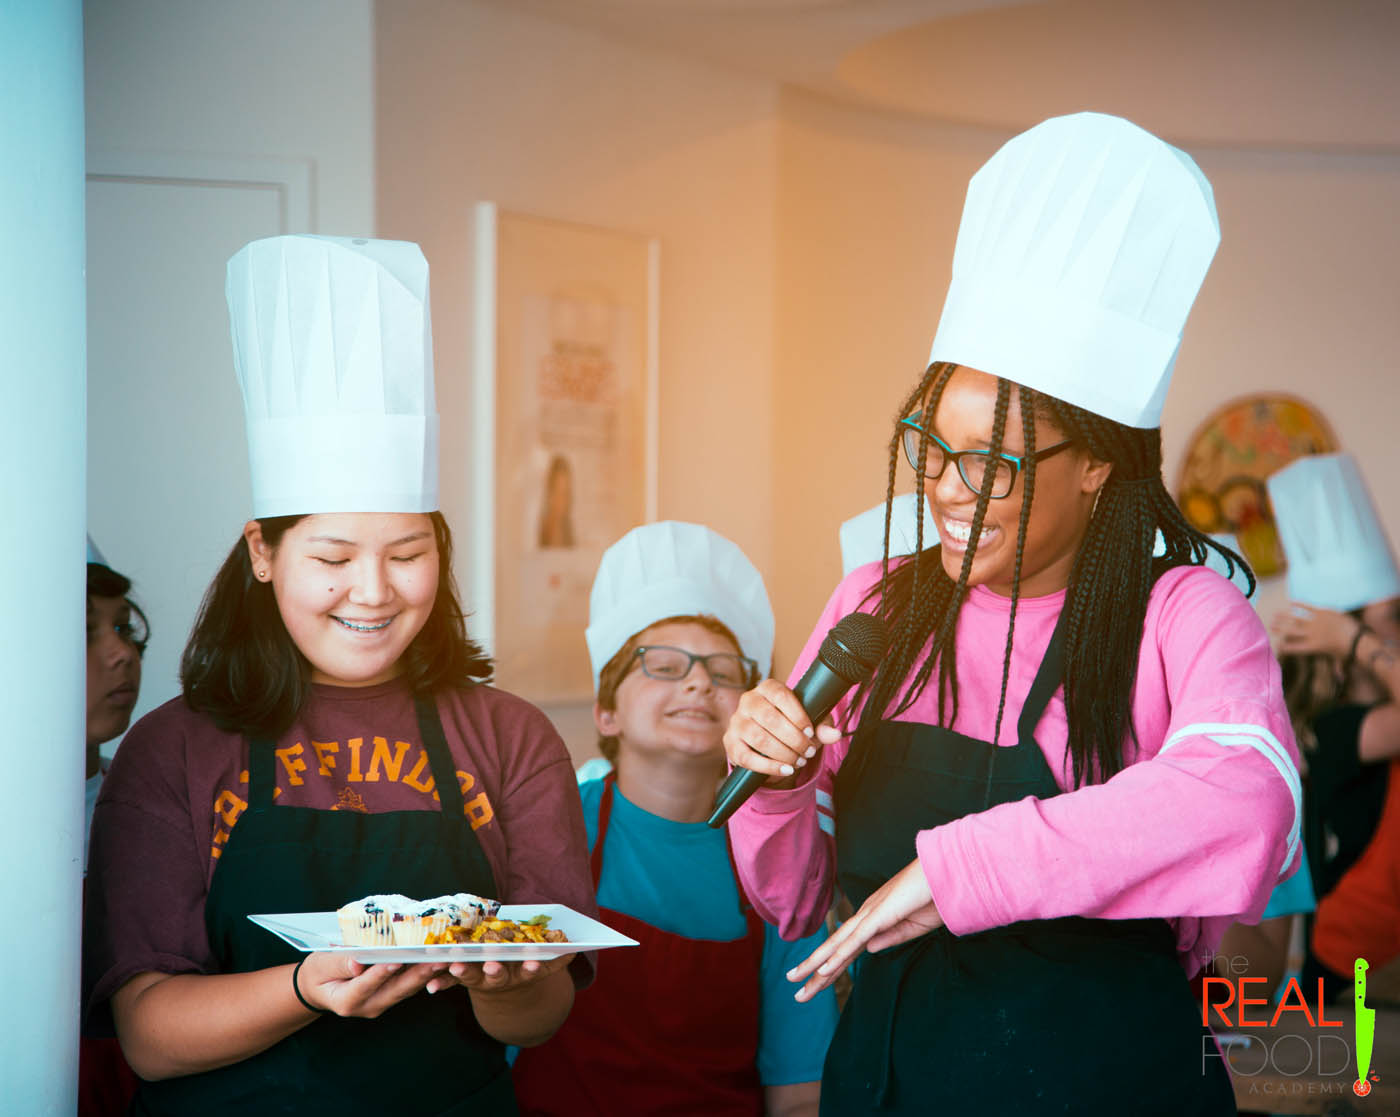 Two young girls at The Real Food Academy Miami's cooking class for teens. 